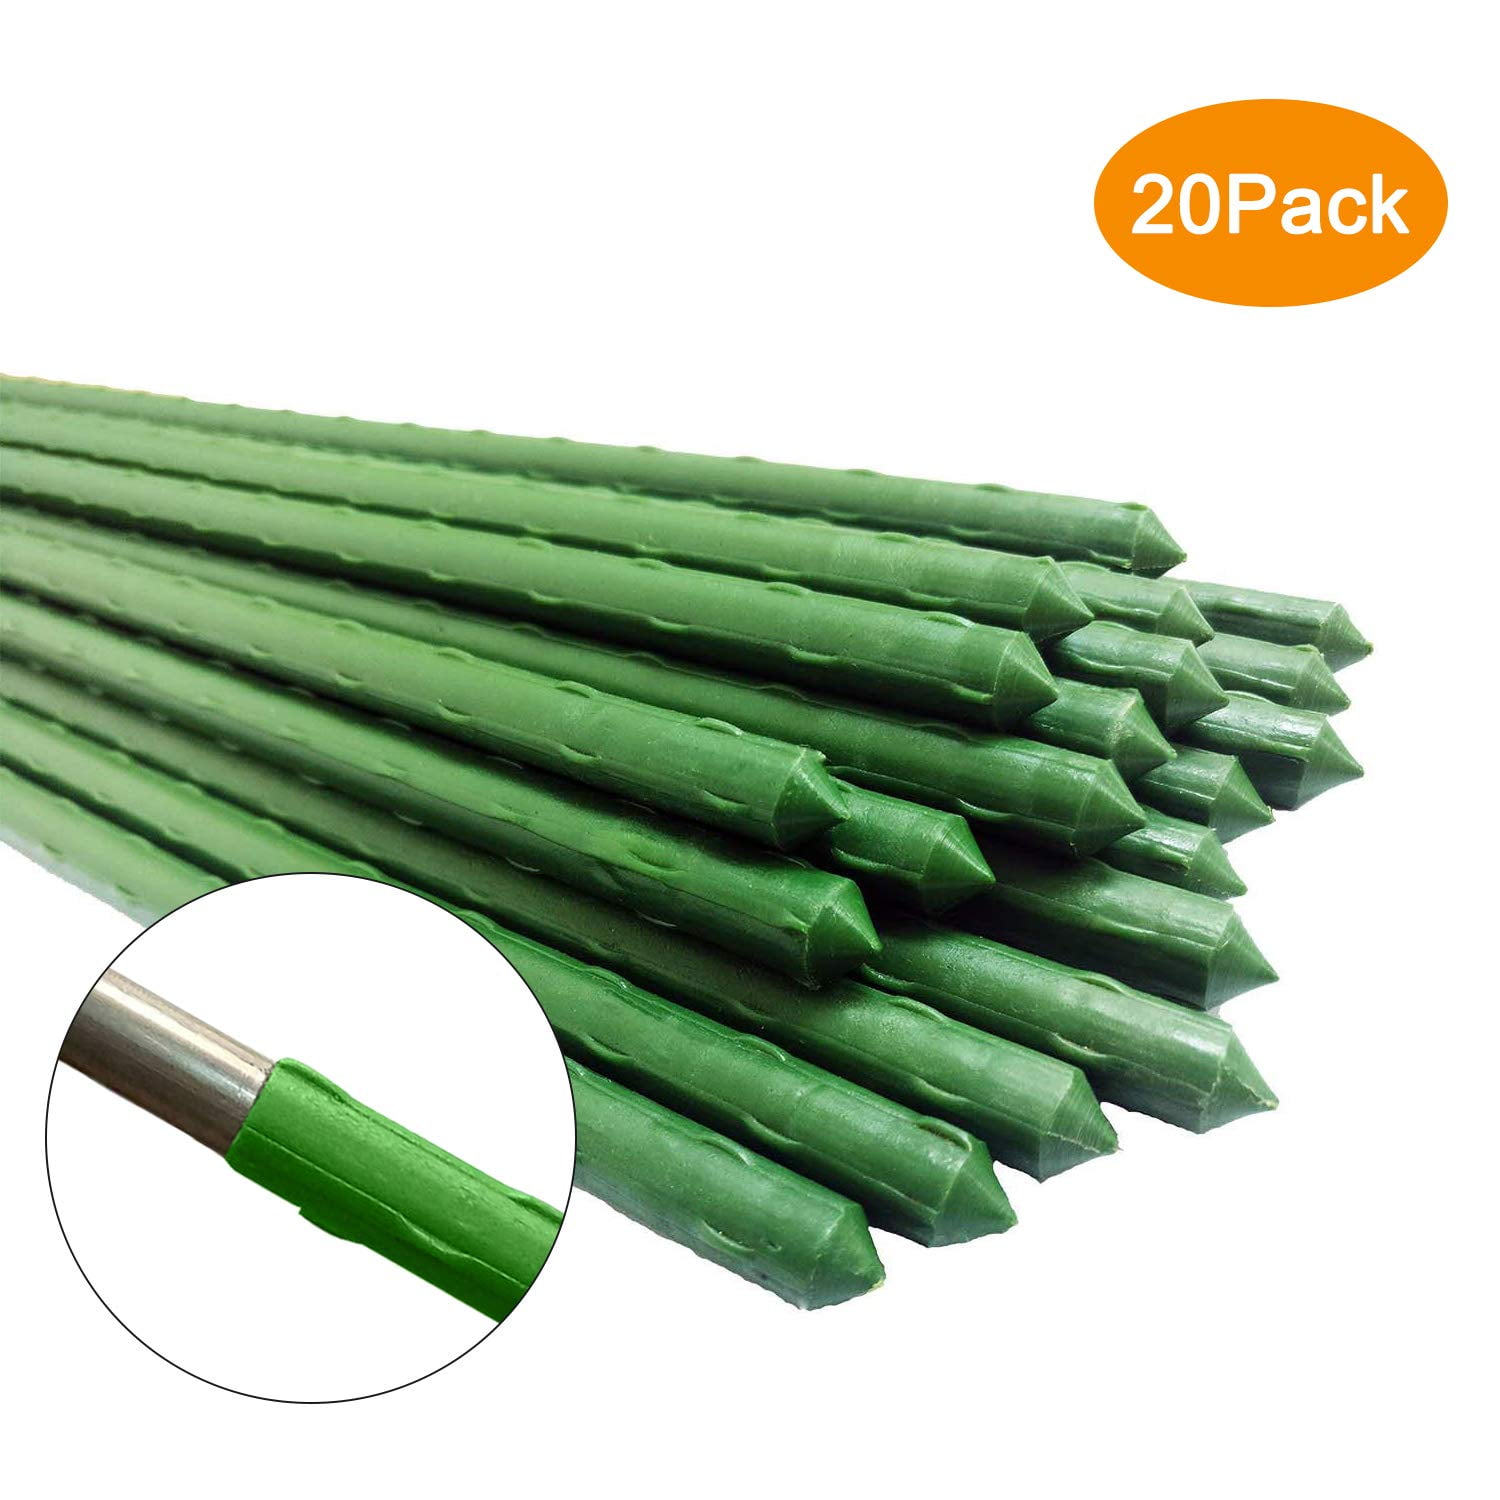 Details about   4 Pack Plant Support Stake Metal Garden Plant Stake Green Half Round Plant G5O7 